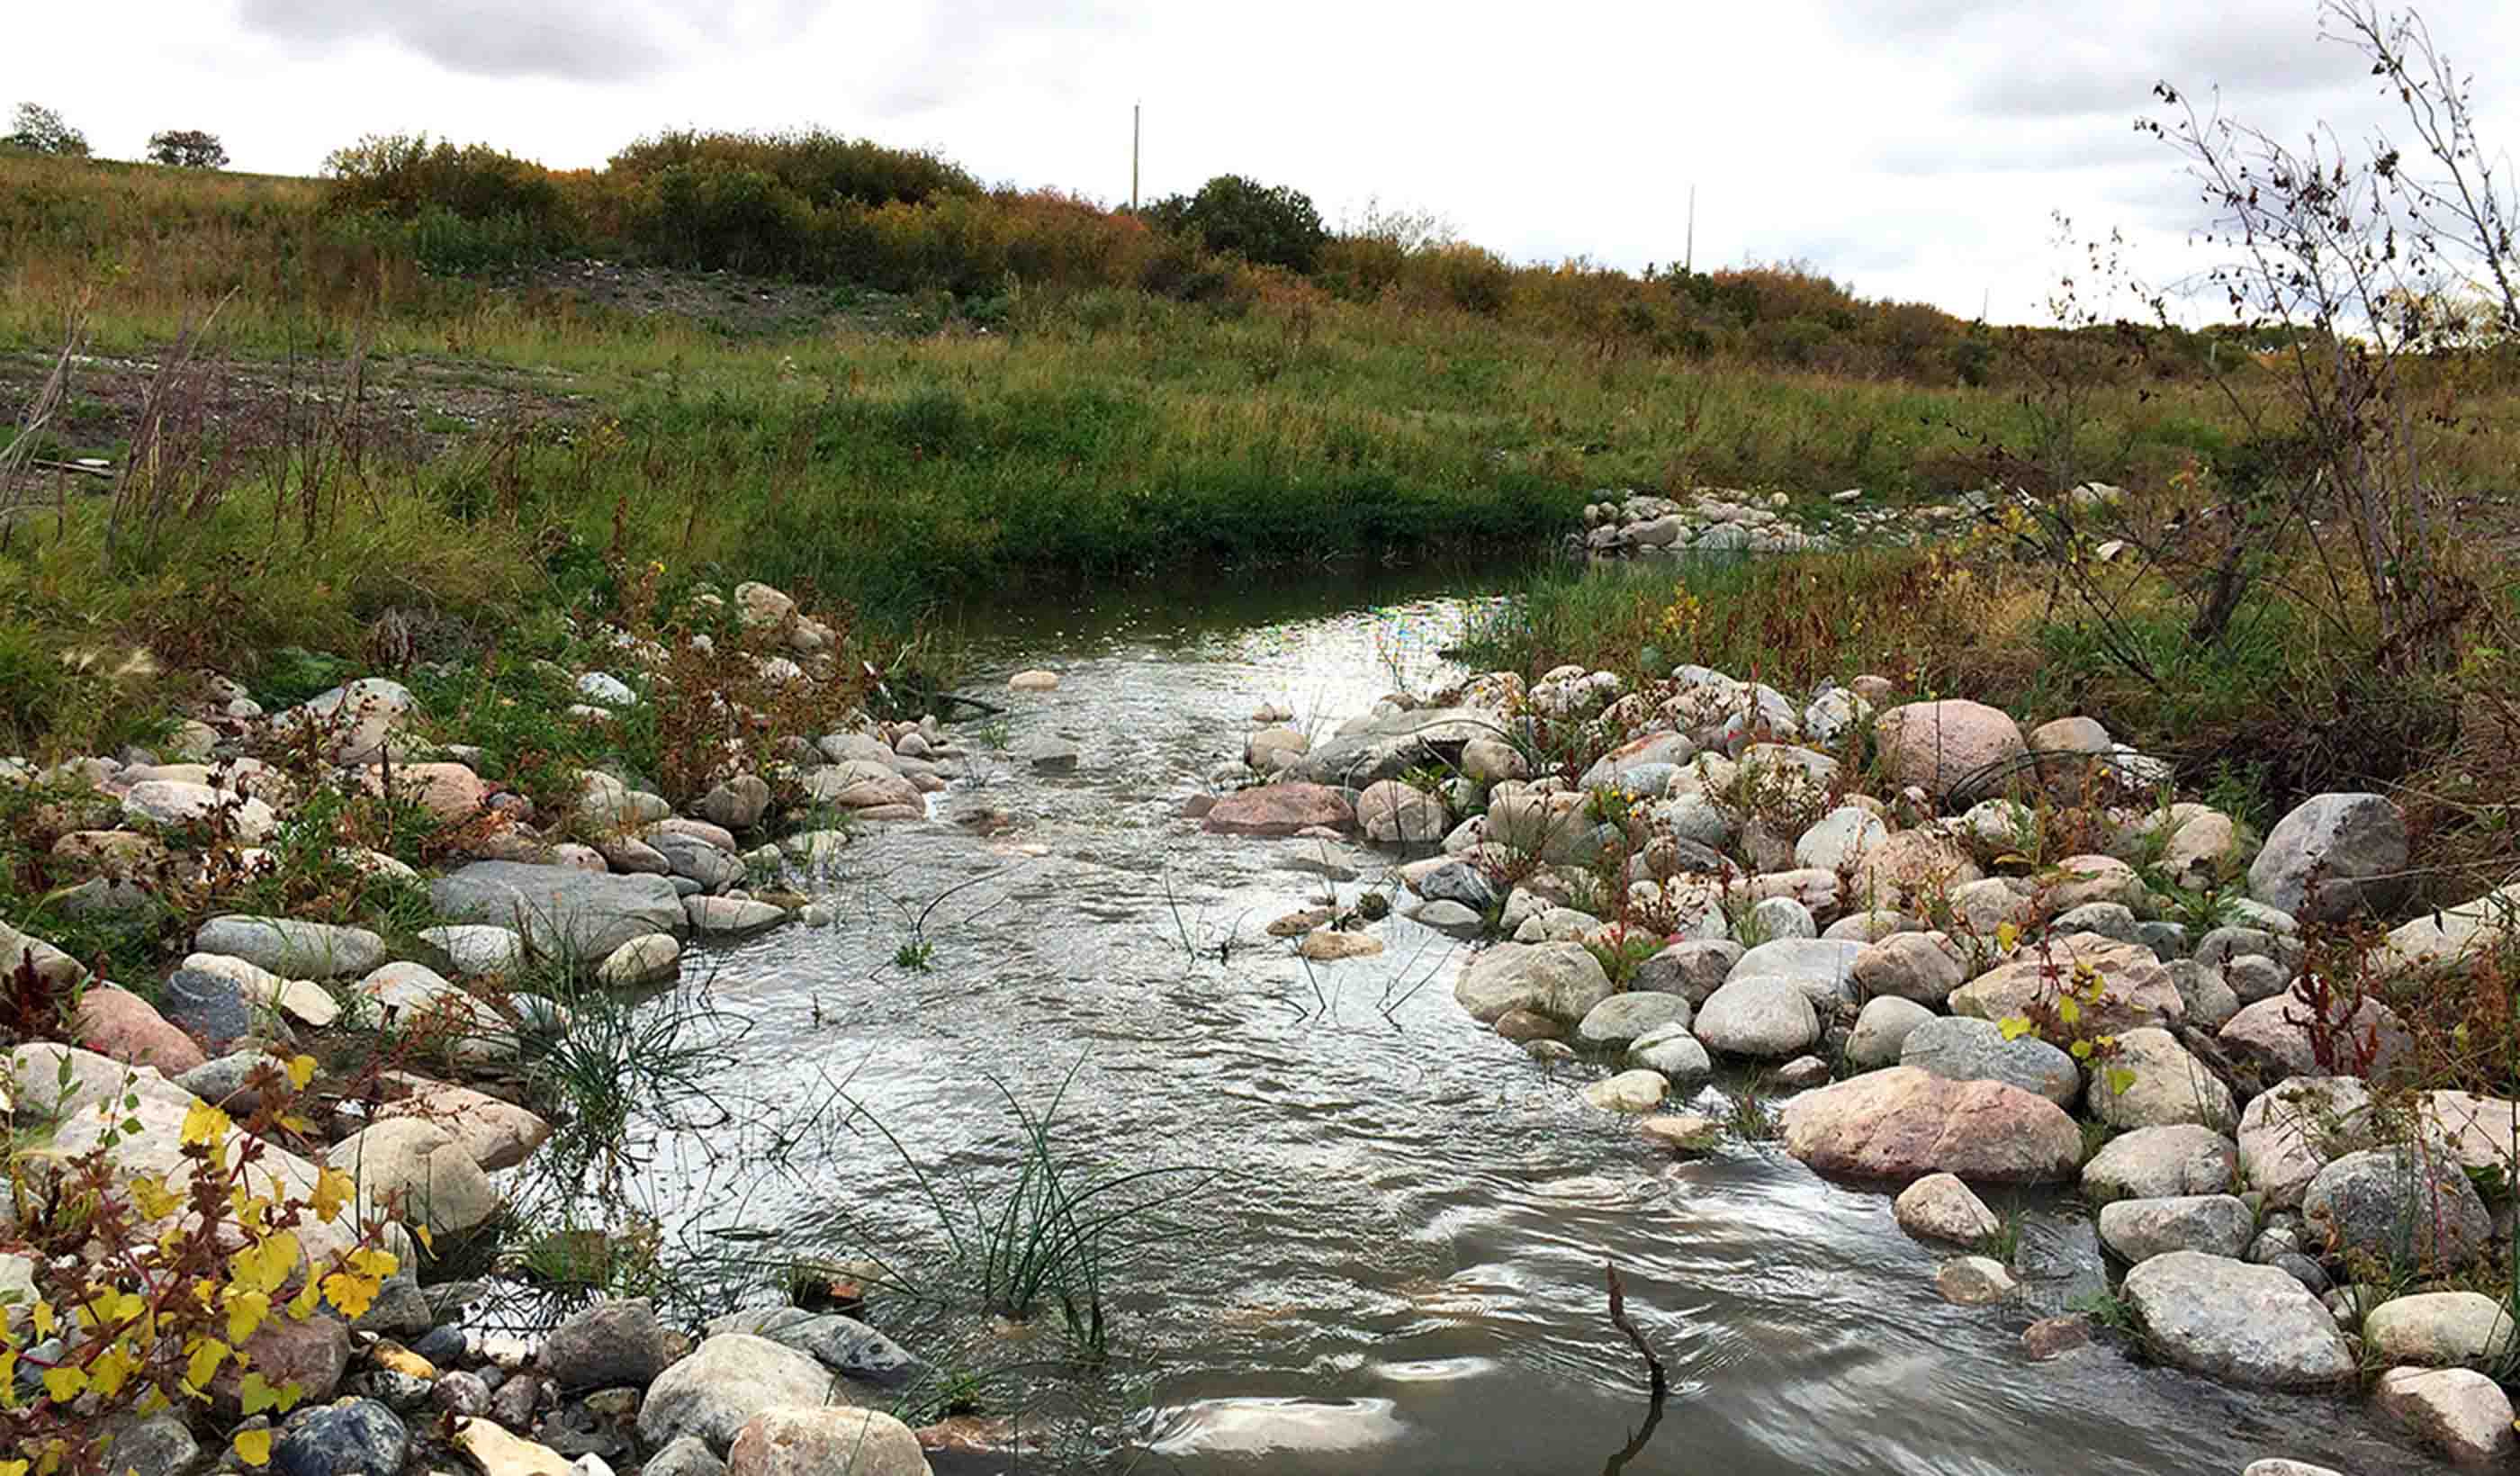 Nature is a patient, not a machine: Looking at stream restoration through the medical lens